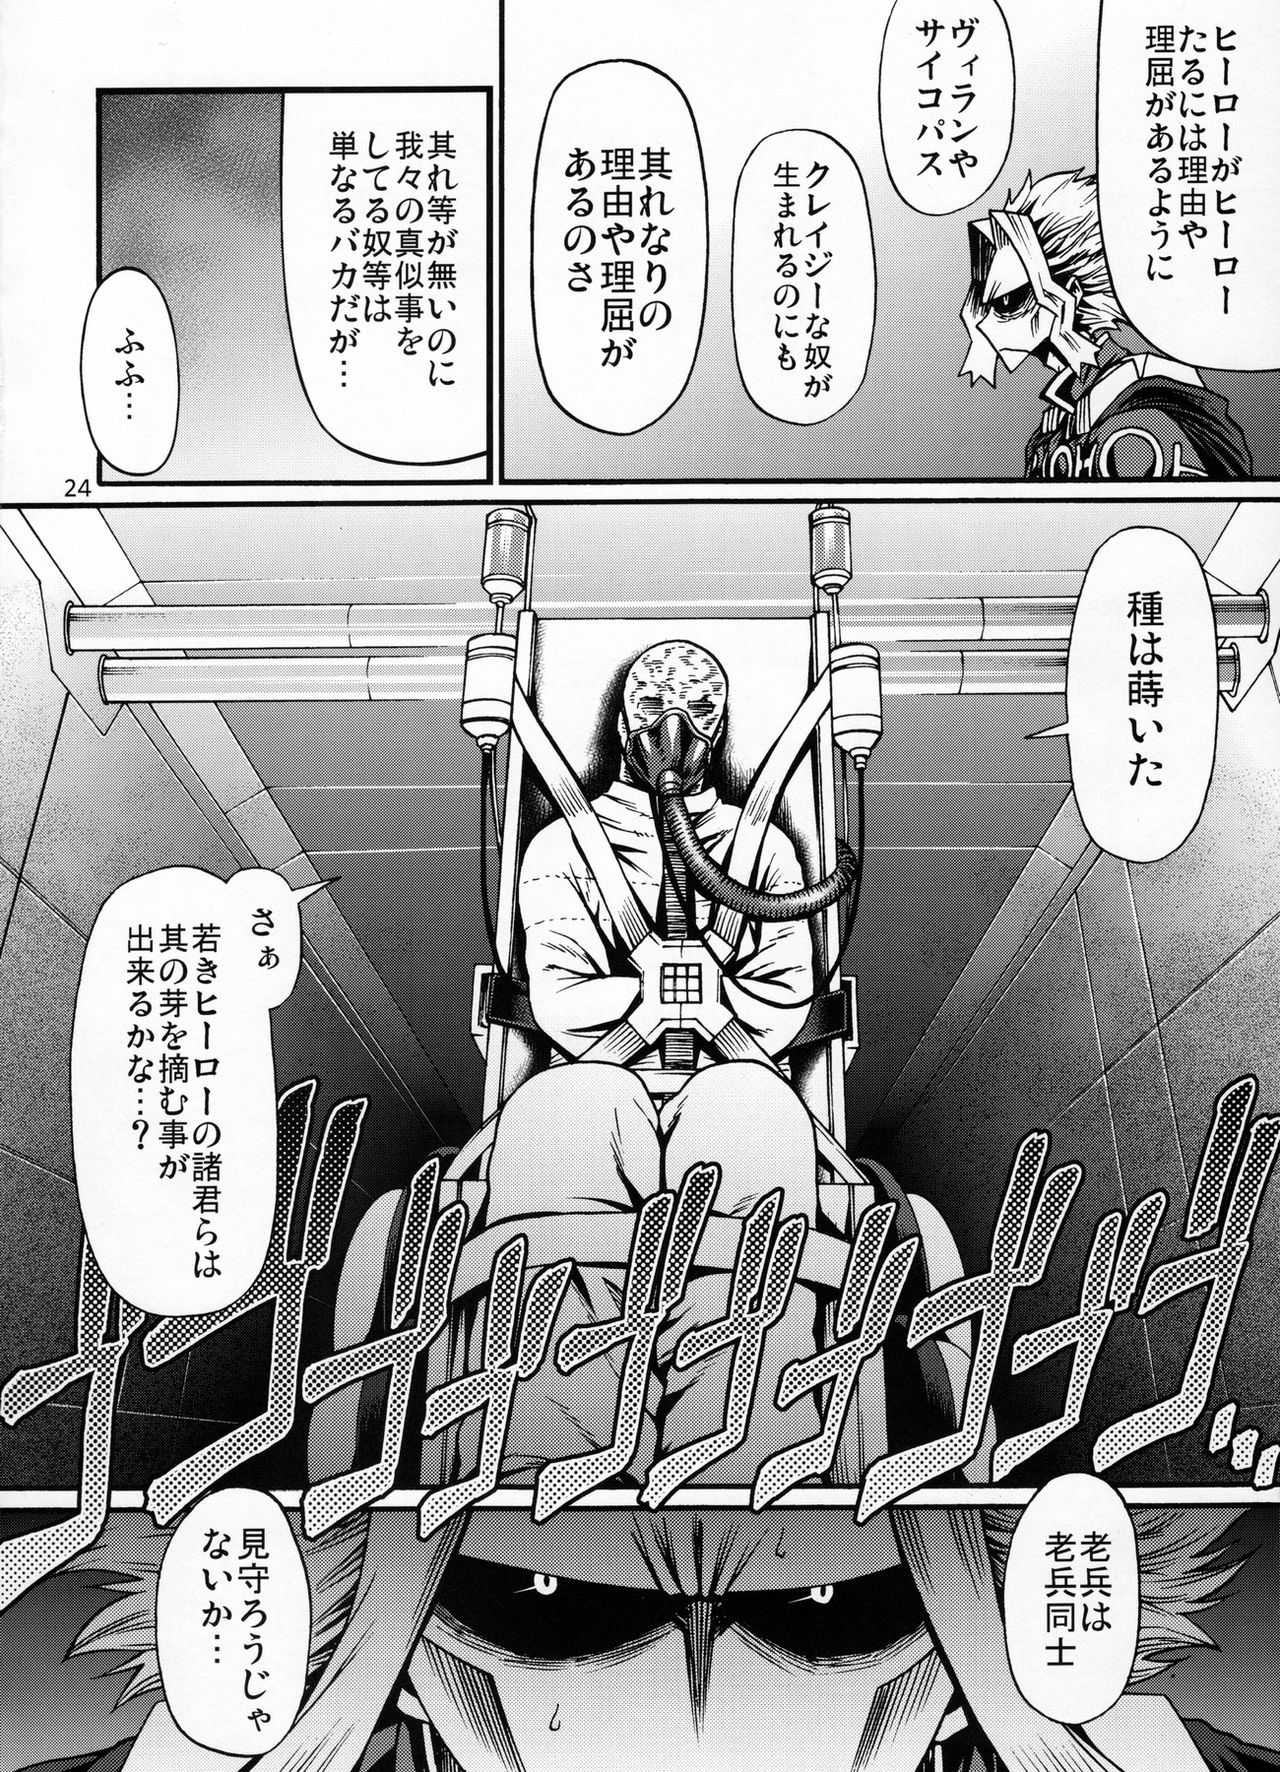 (C91) [CELLULOID-ACME (Chiba Toshirou)] Love you as Kill you (My Hero Academia) page 23 full